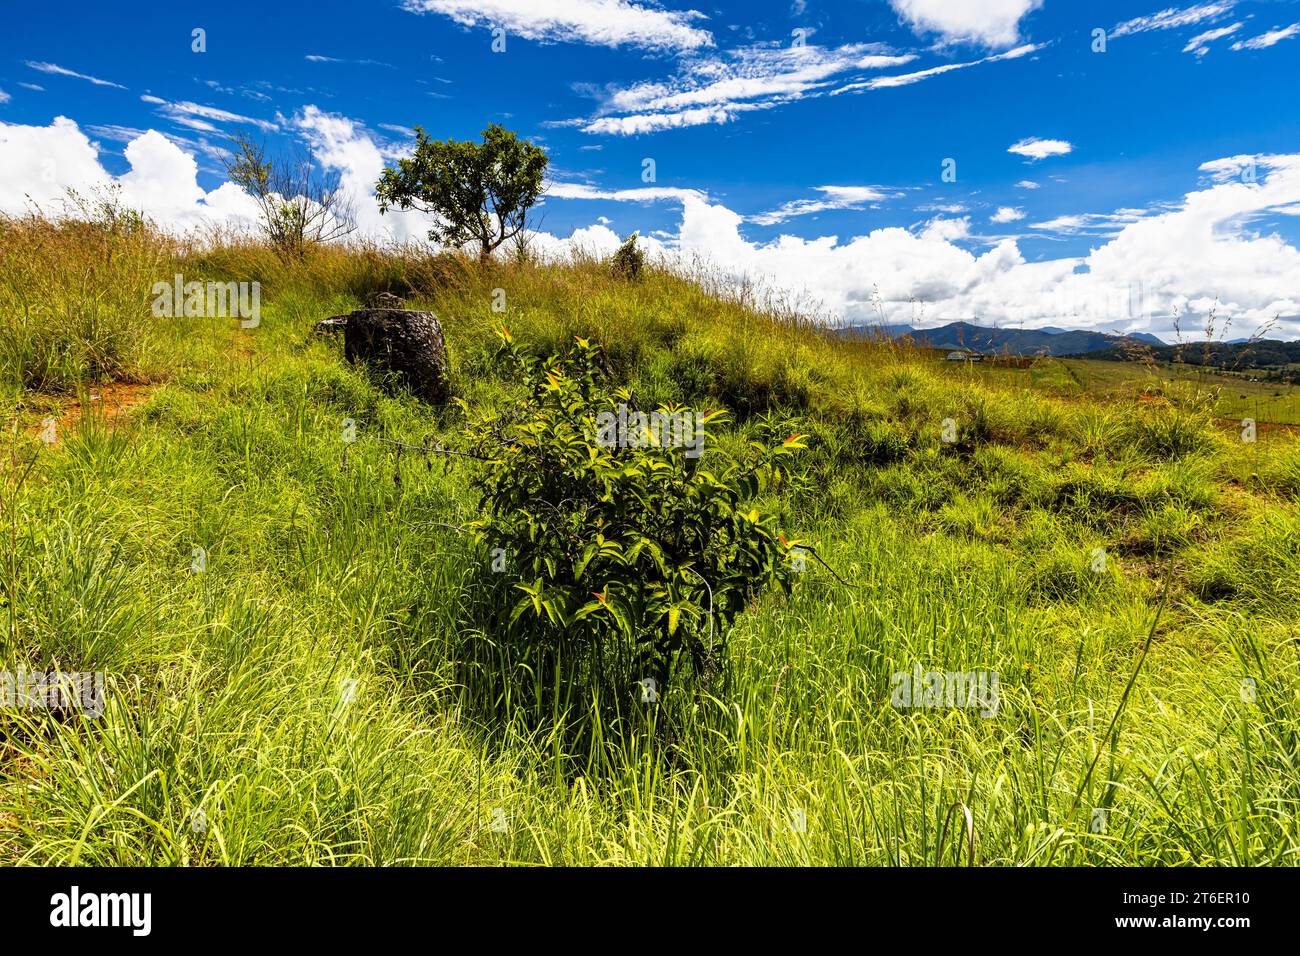 Plain of Jars(Jars plain), crater by air bomb, group 2 of site 1, Phonsavan, Xiangkhouang province, Laos, Southeast Asia, Asia Stock Photo